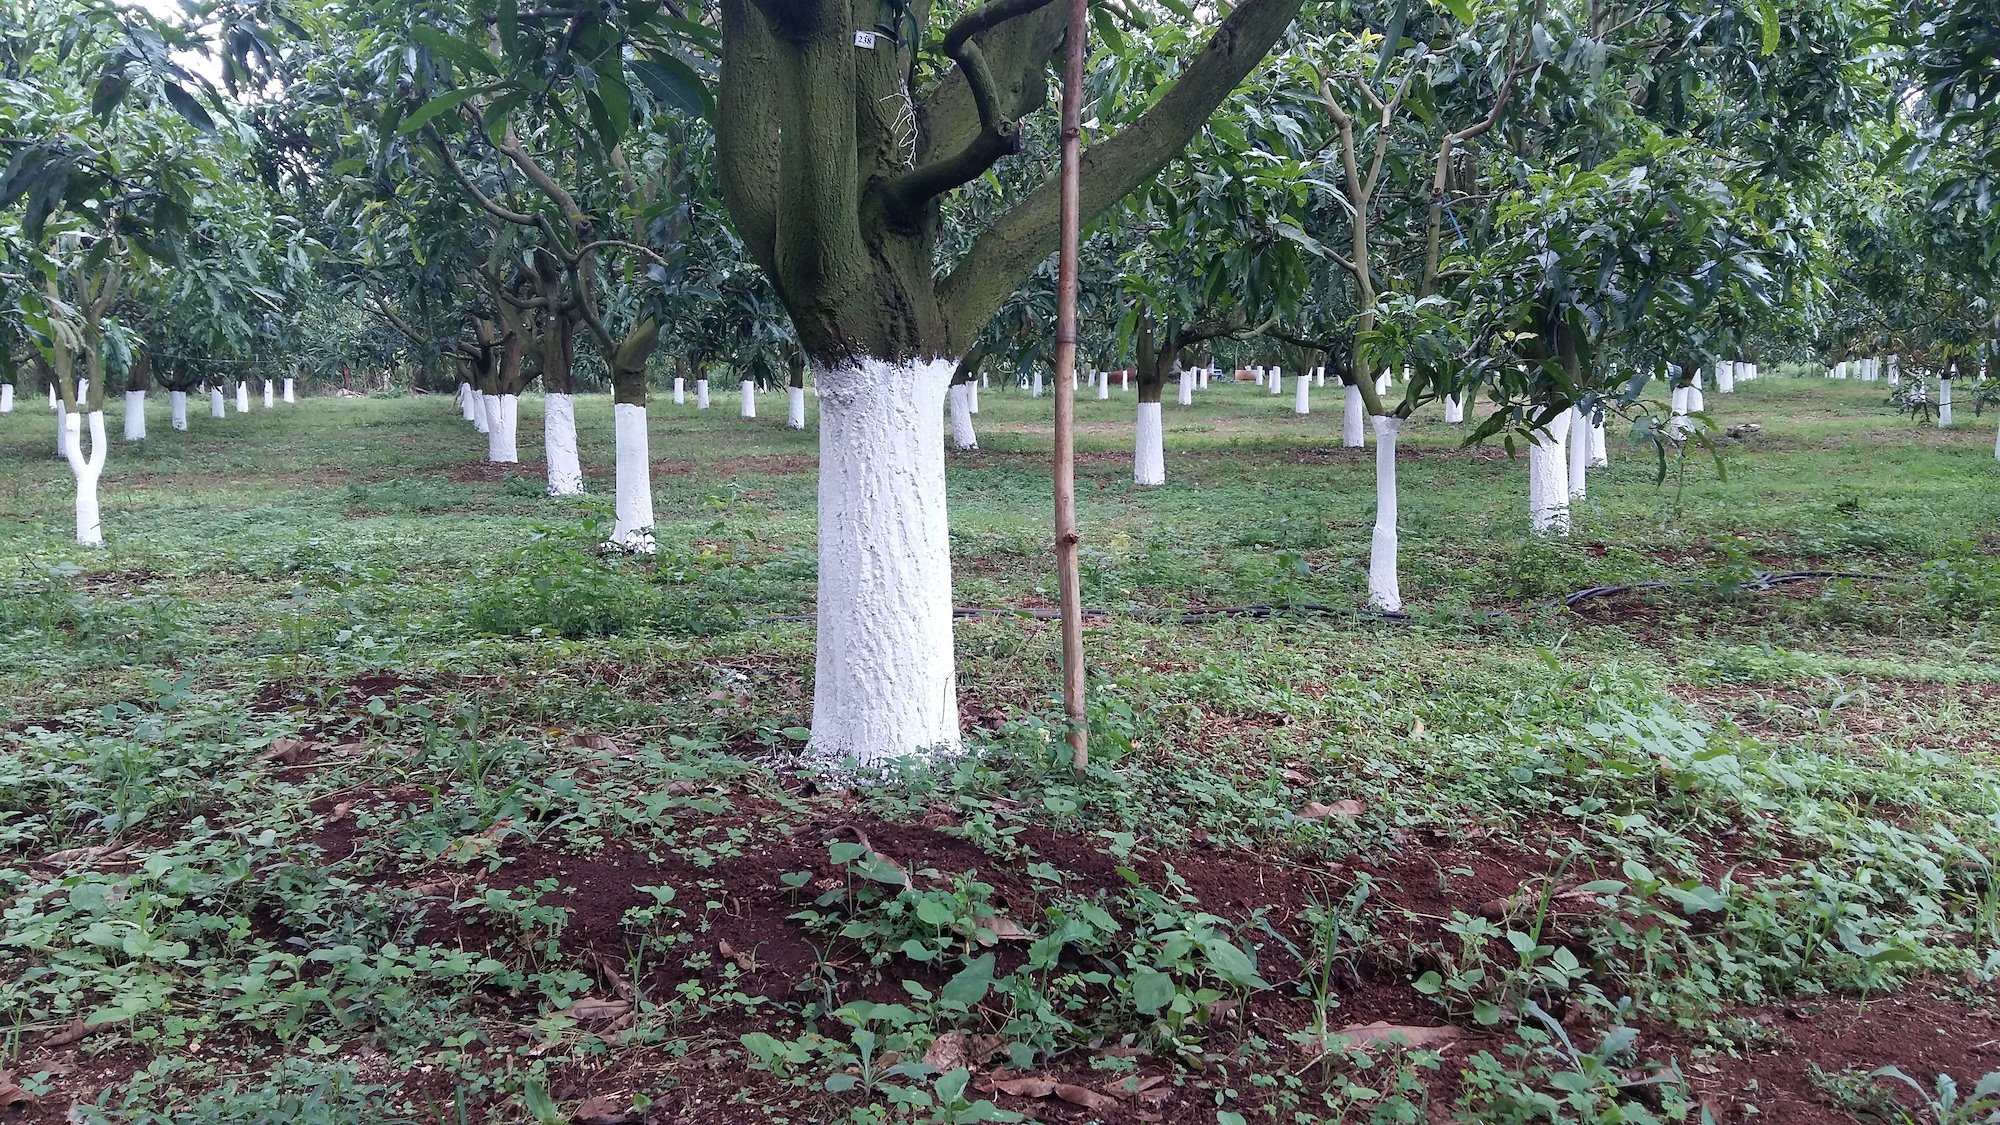 Field of trees with their trunks painted white